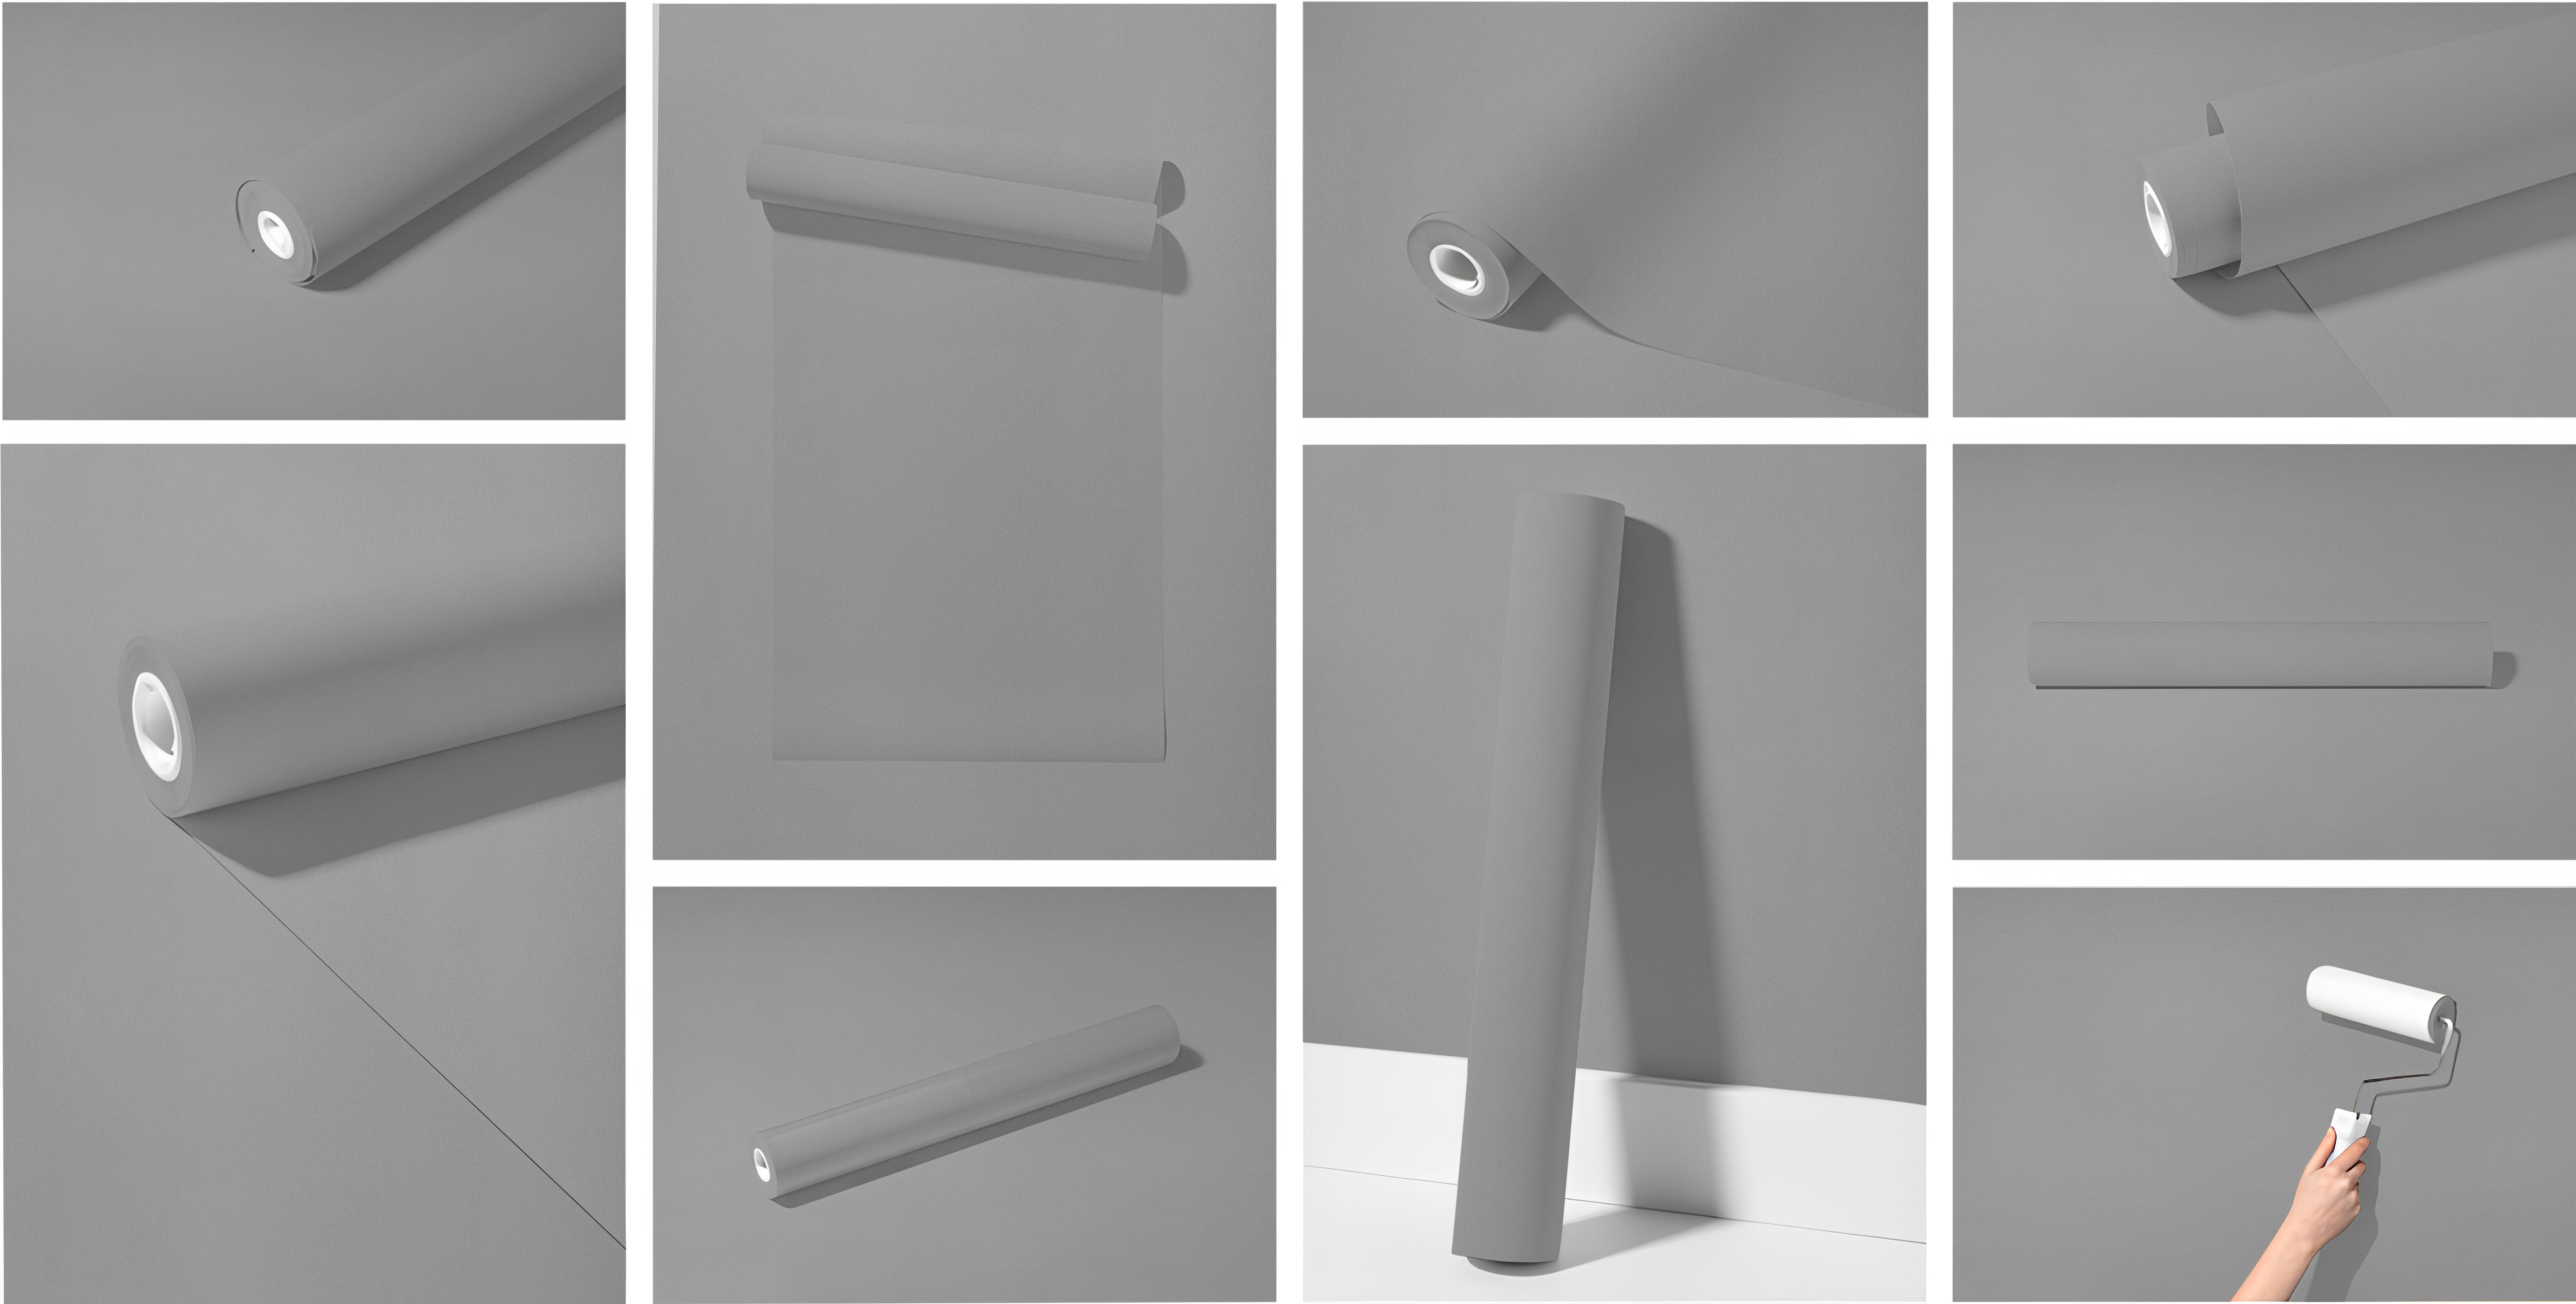 Peel & Stick Removable Re-usable Paint - Color RAL 7004 Signal Grey - offRAL™ - RALRAW LLC, USA